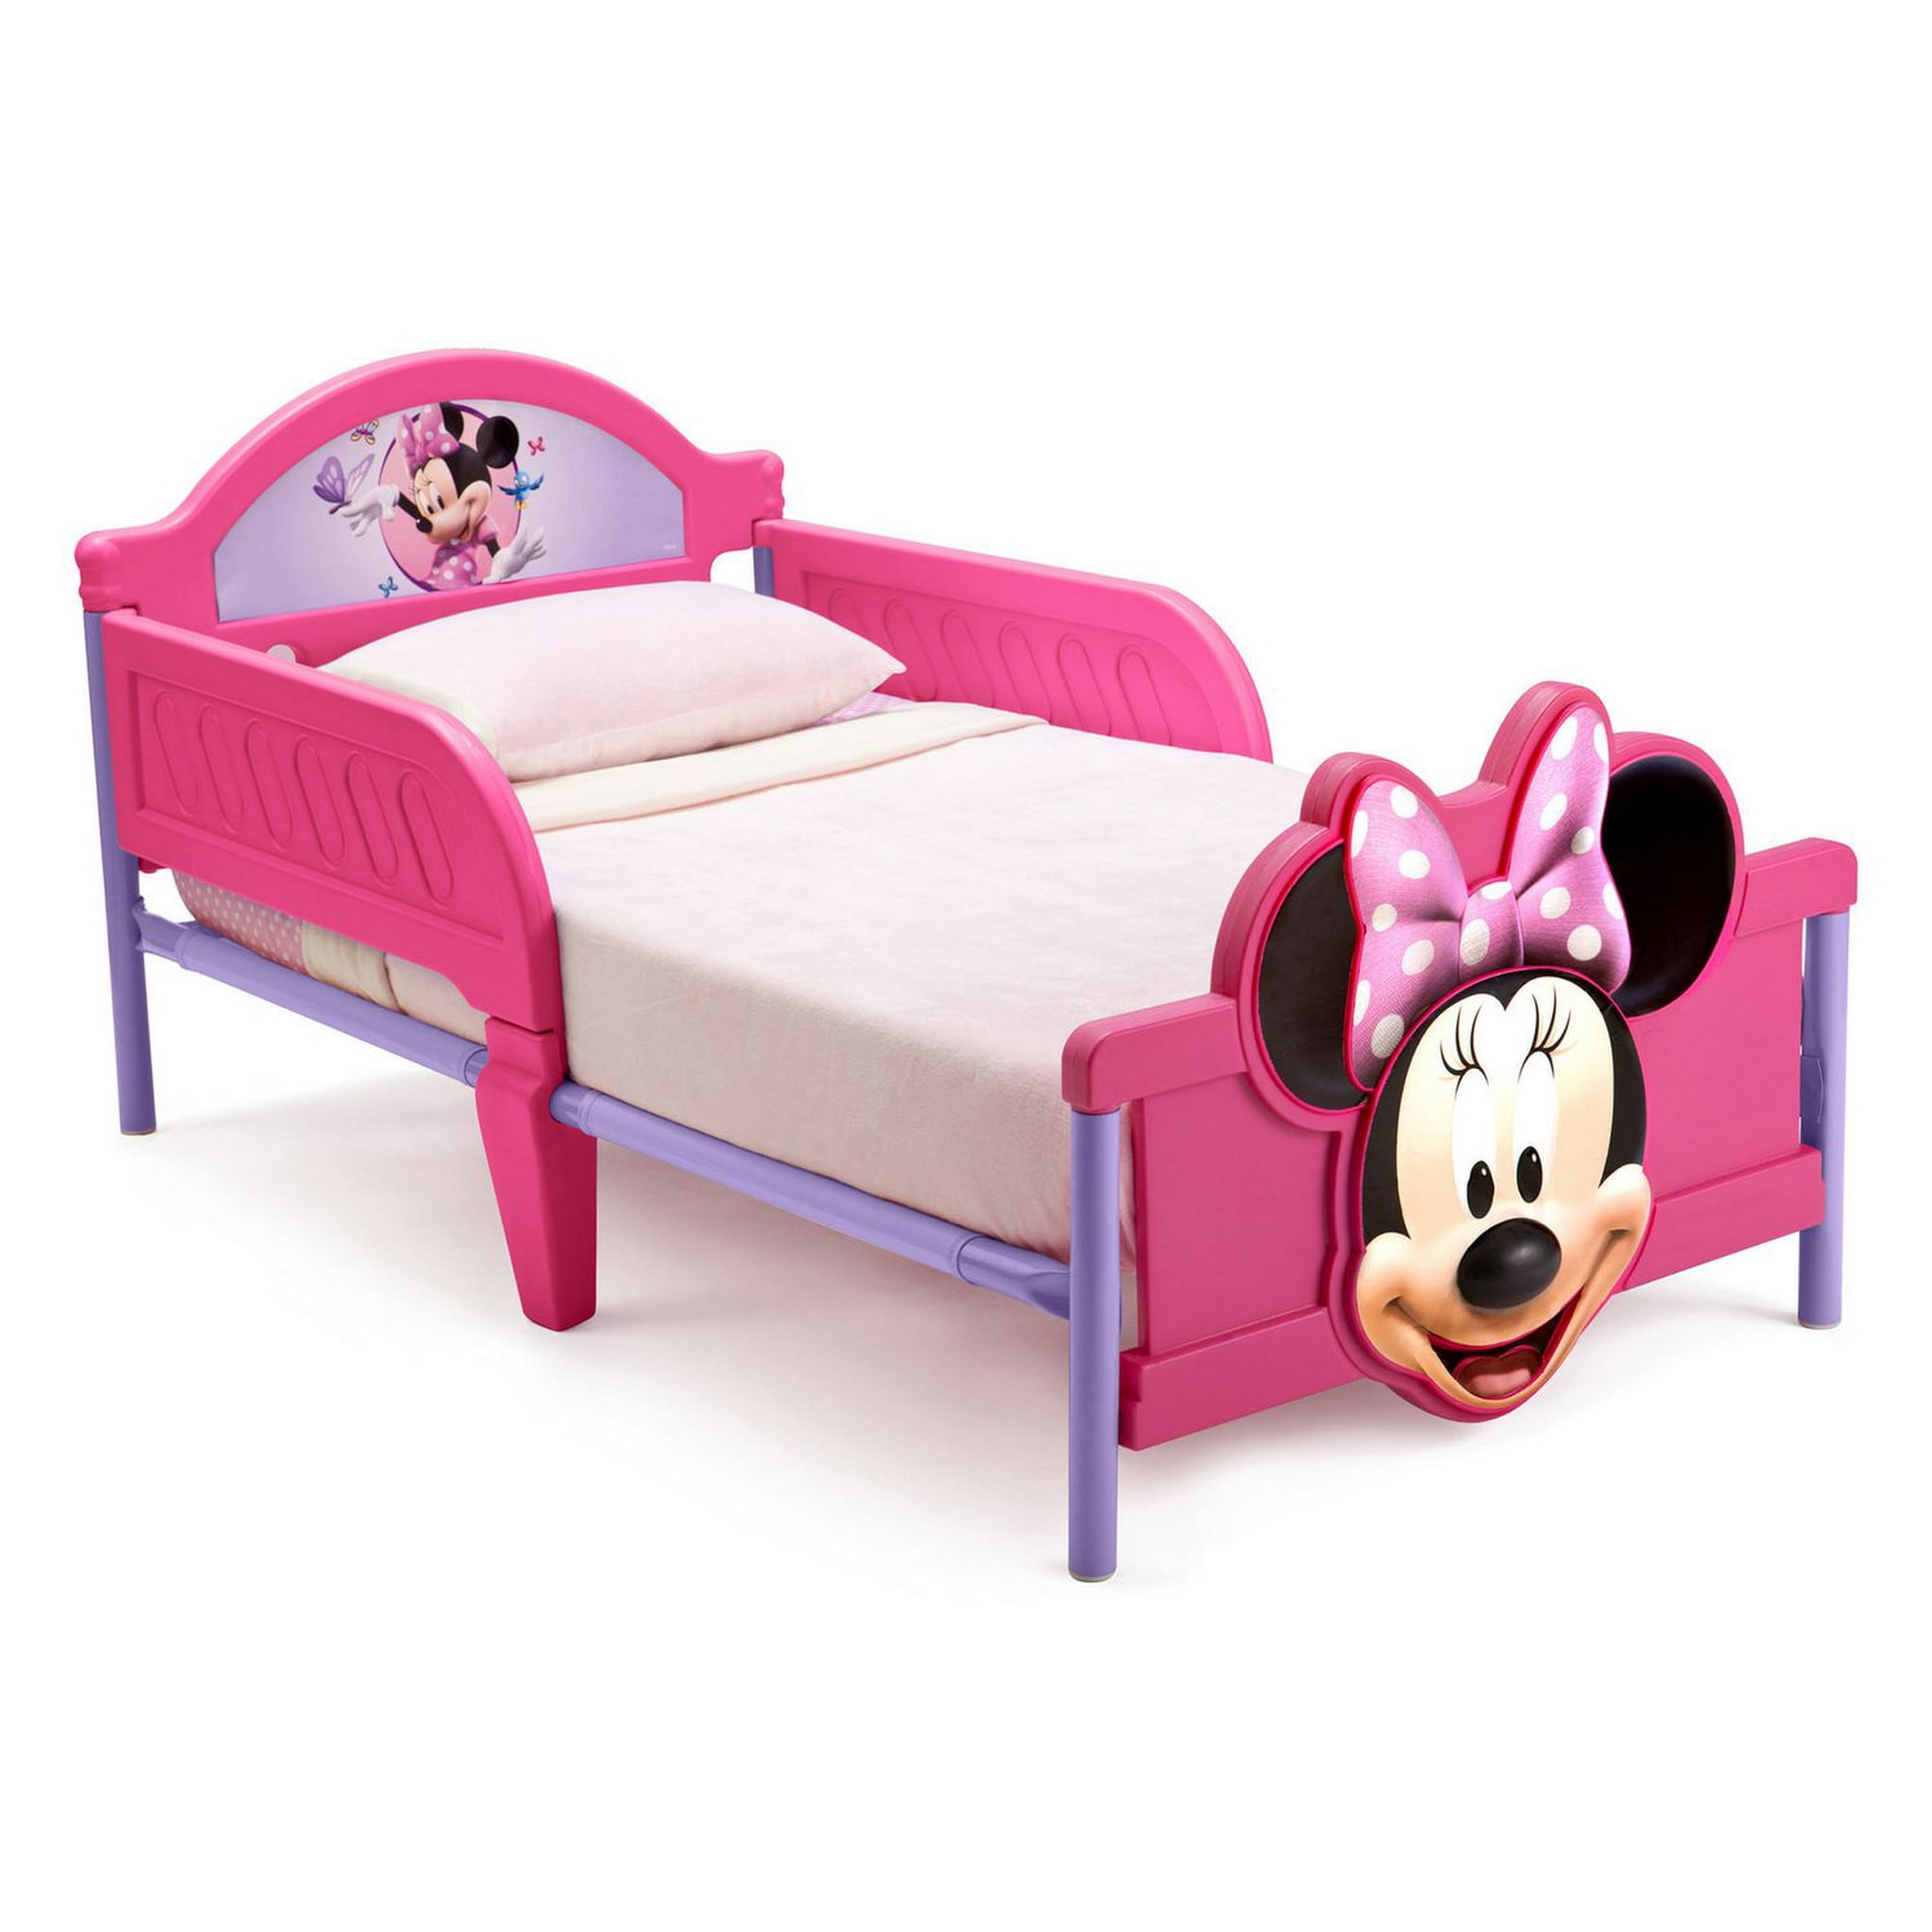 Disney Toddler Minnie or Mickey Mouse '12 Days India